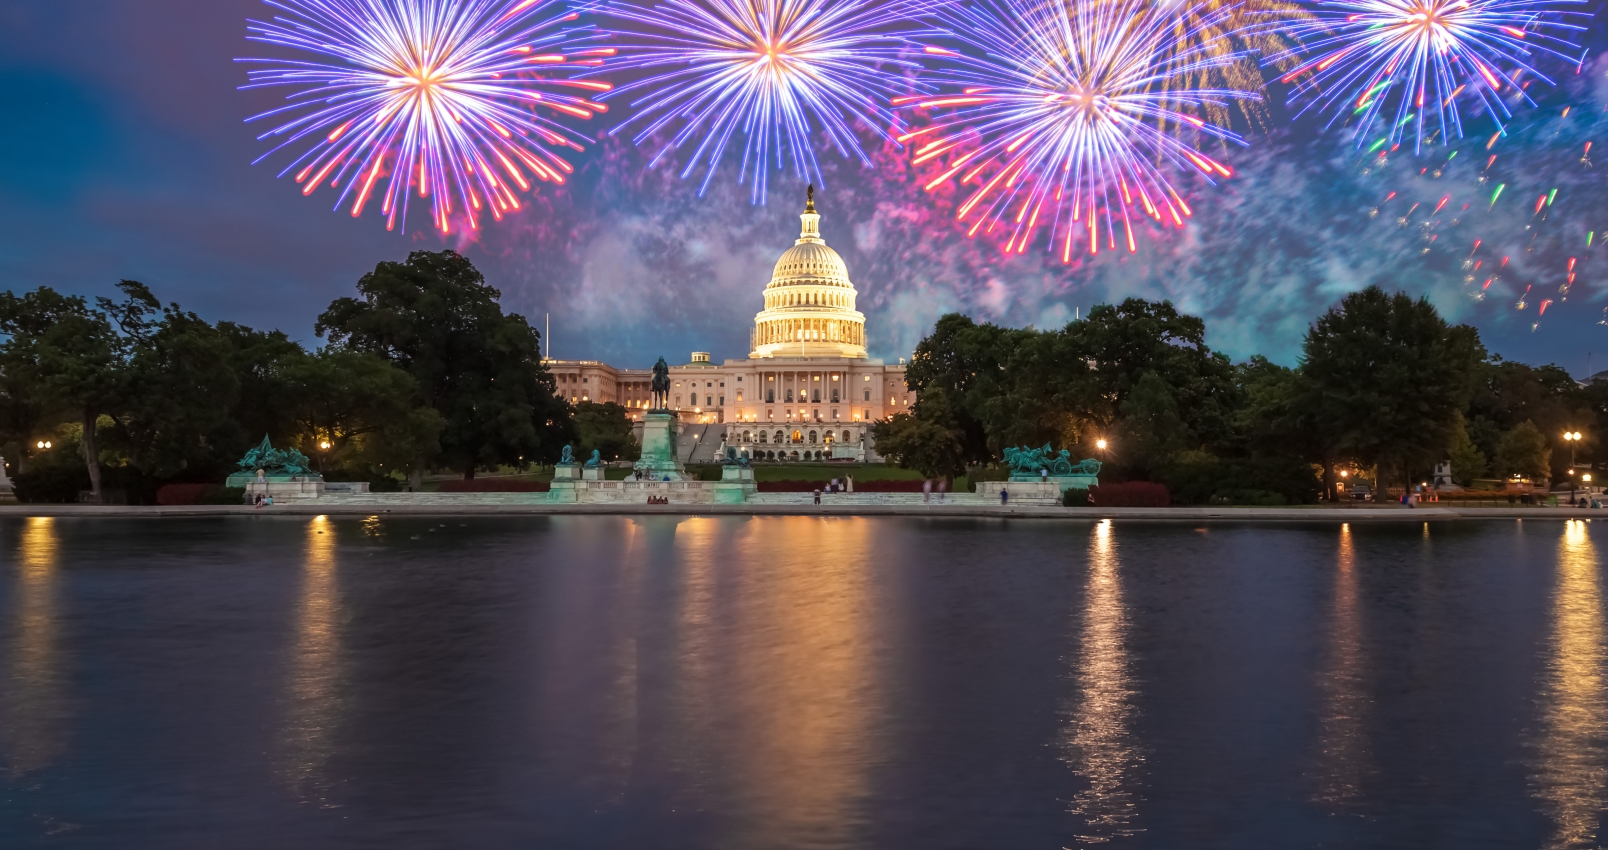 fireworks above the capital building in washington, dc